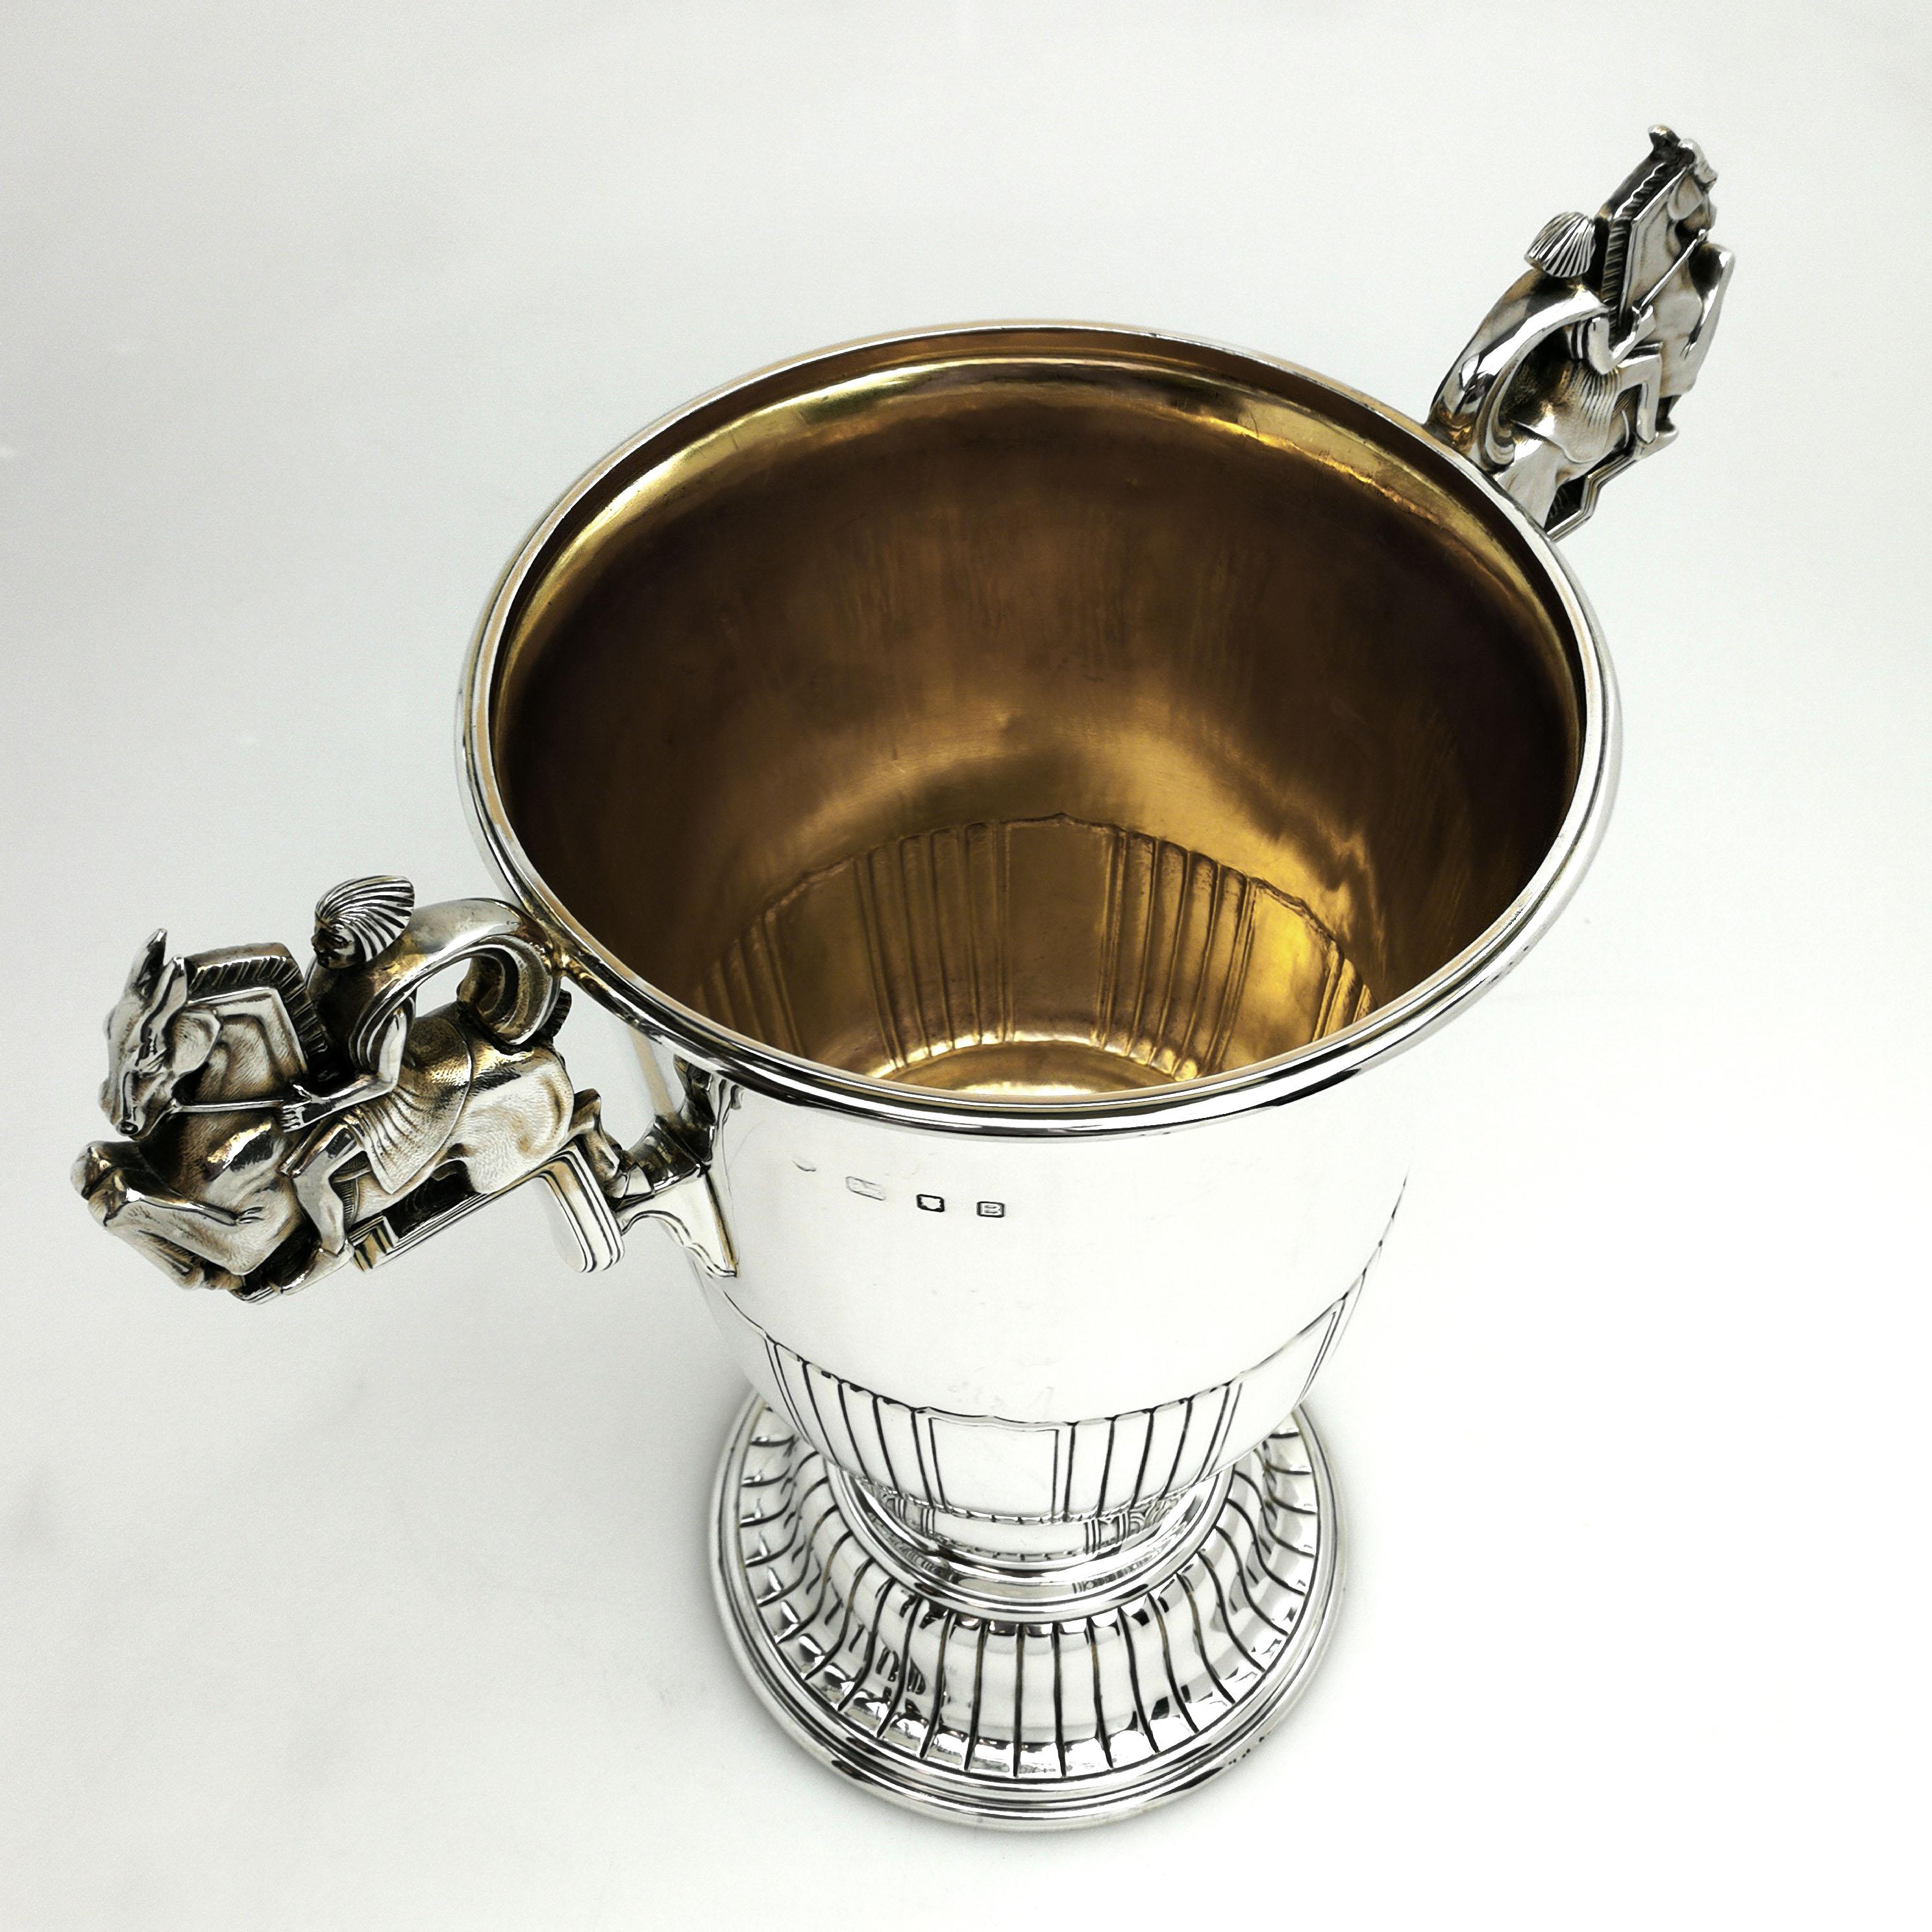 20th Century Art Deco Large Sterling Silver Cup & Cover / Trophy 1937 Horse Equestrian